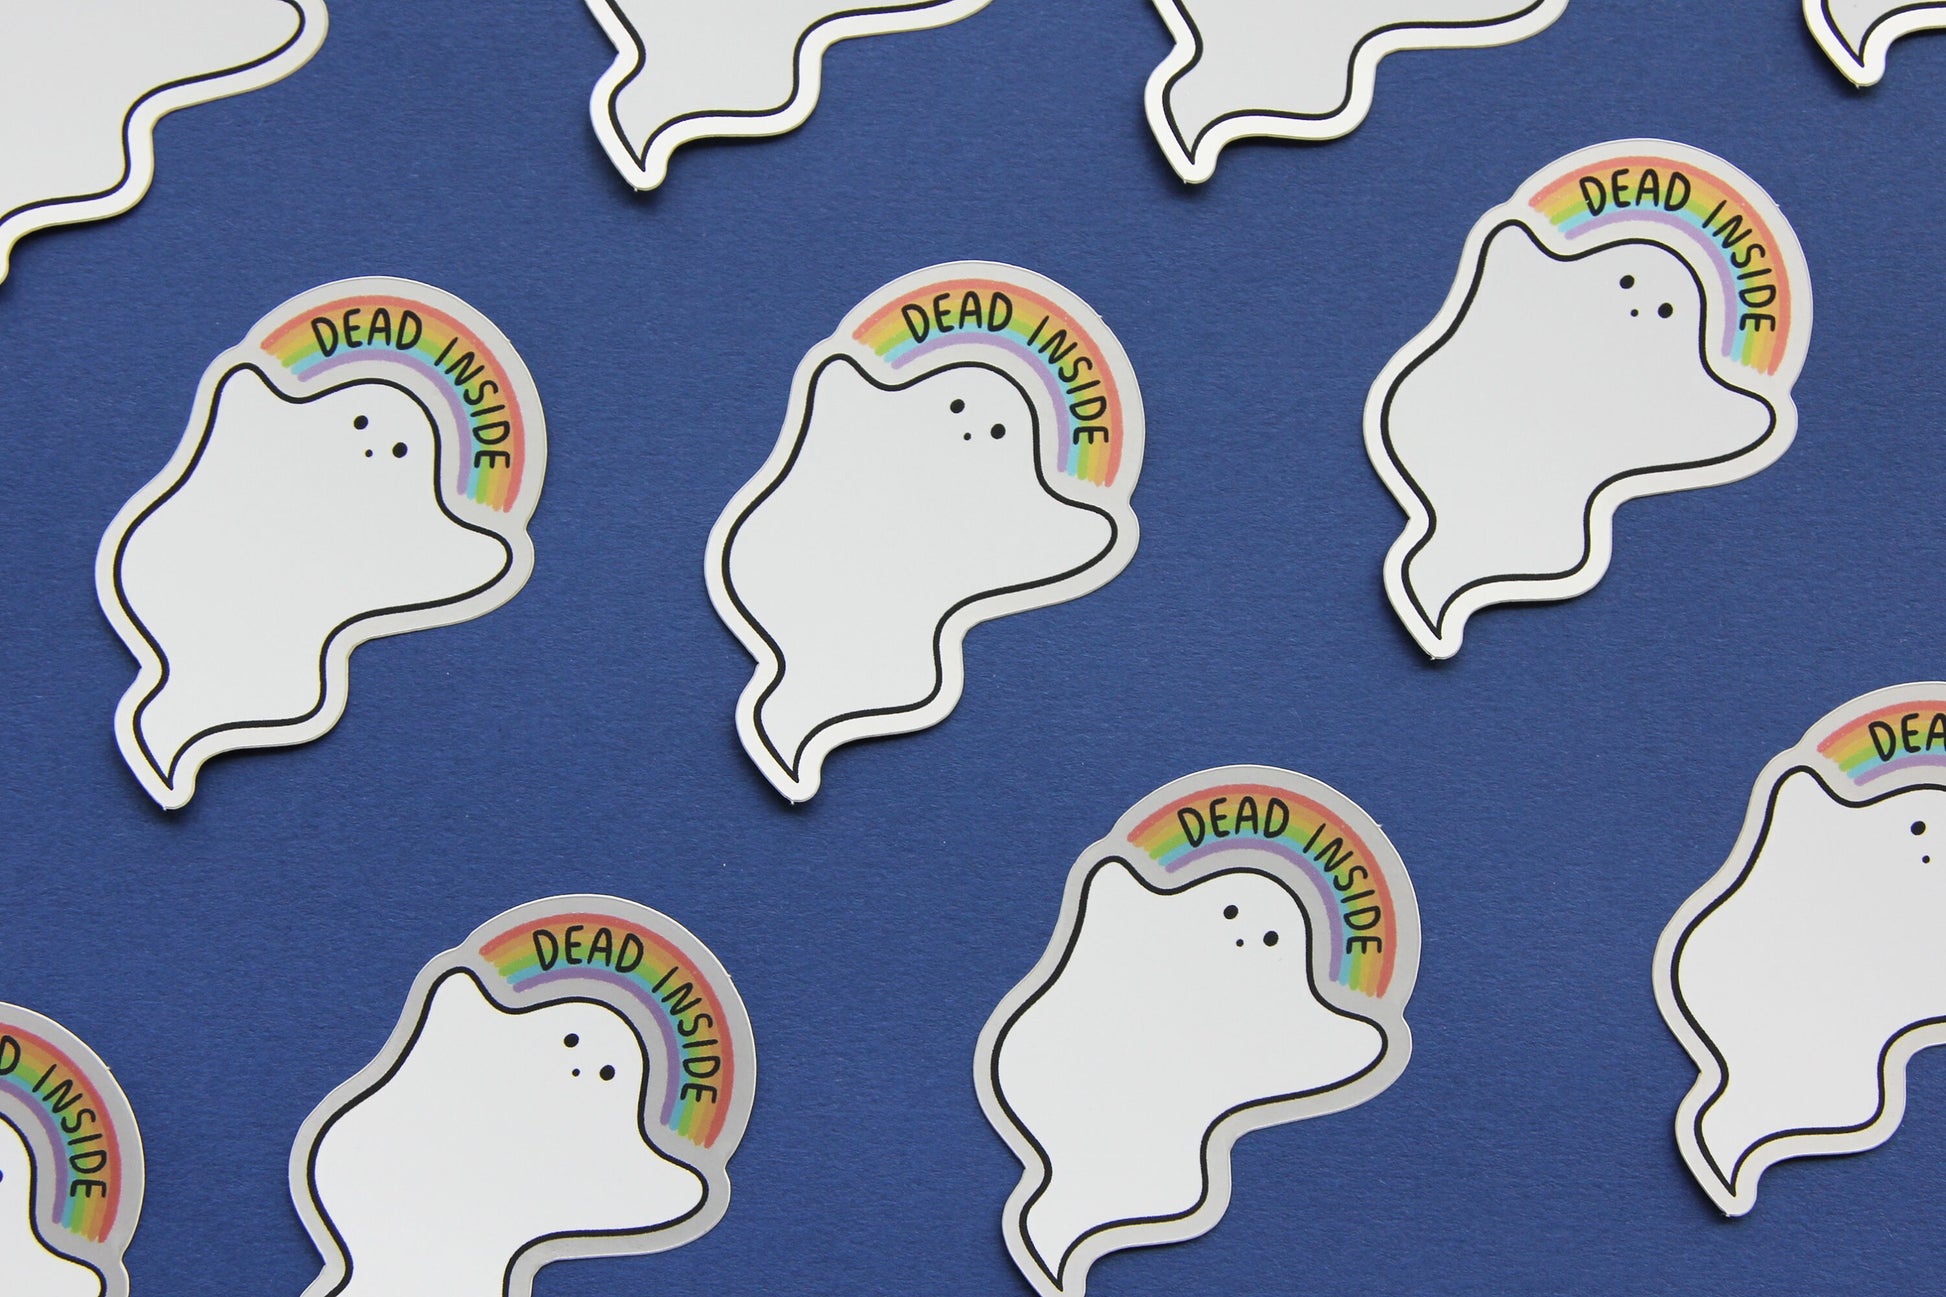 A grid JaneLi.Co stickers that show little white ghosts holding up rainbows that says "Dead Inside" over a navy blue background. Each sticker has a metallic silver border.